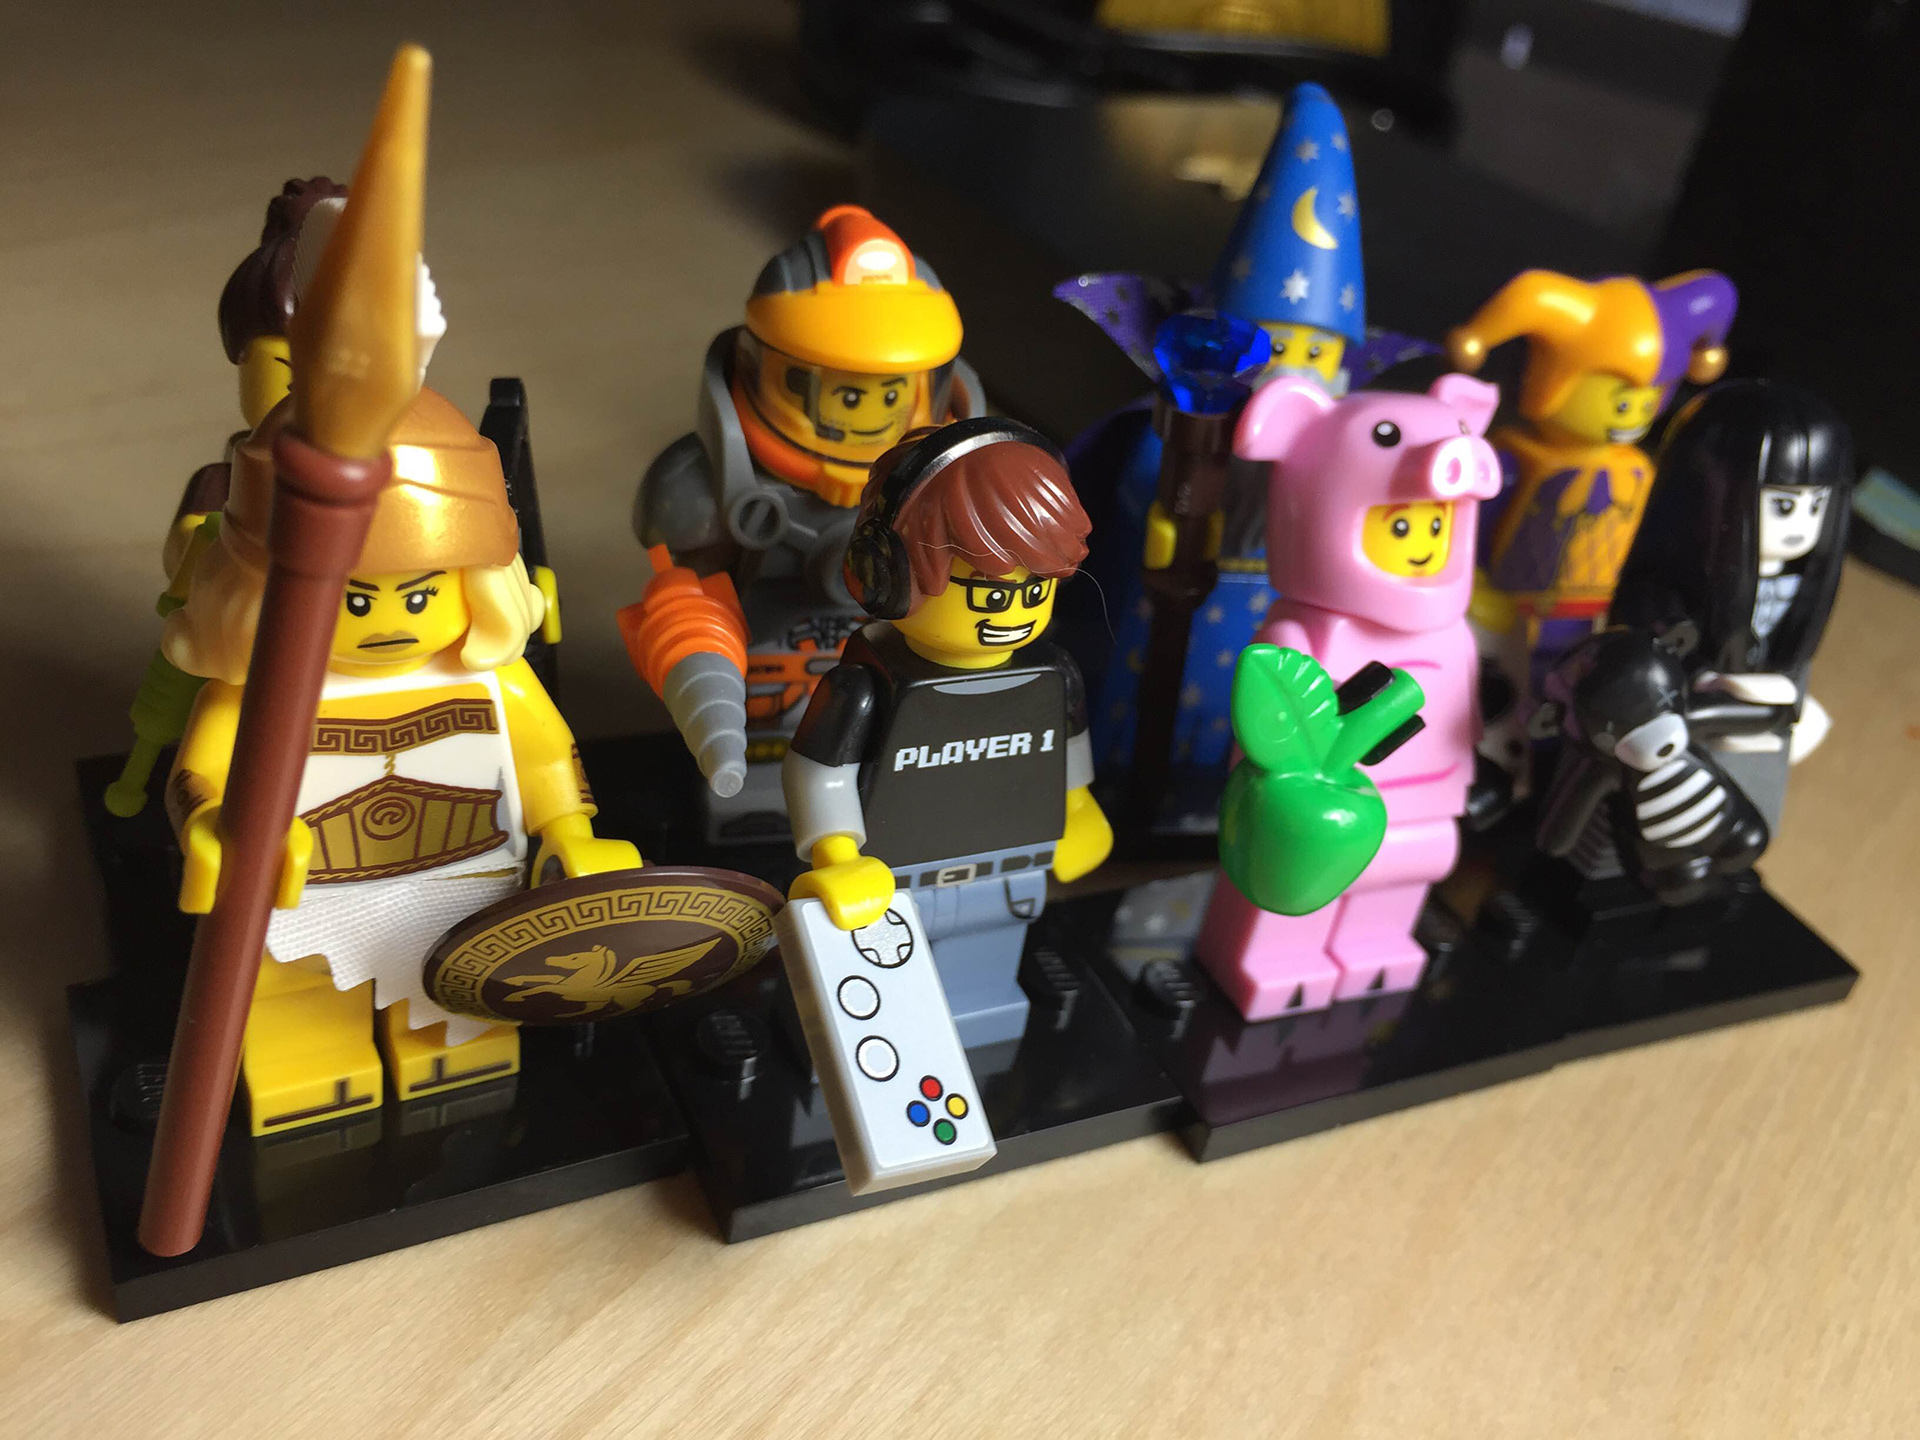 The Latest LEGO Minifigures Are Video Game Characters Too